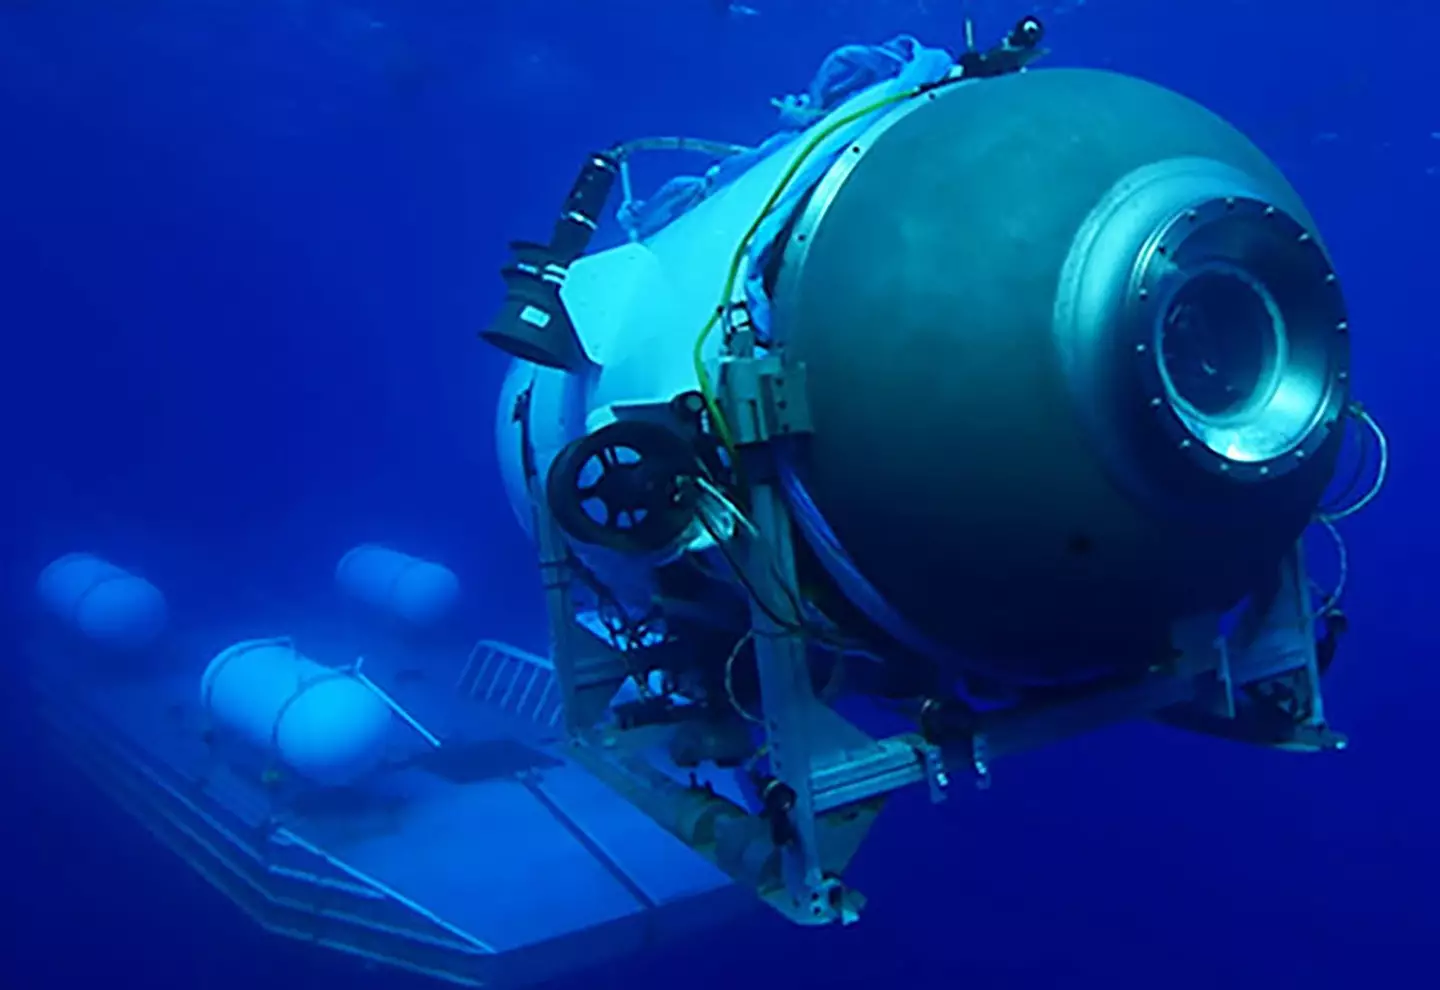 The missing submersible.